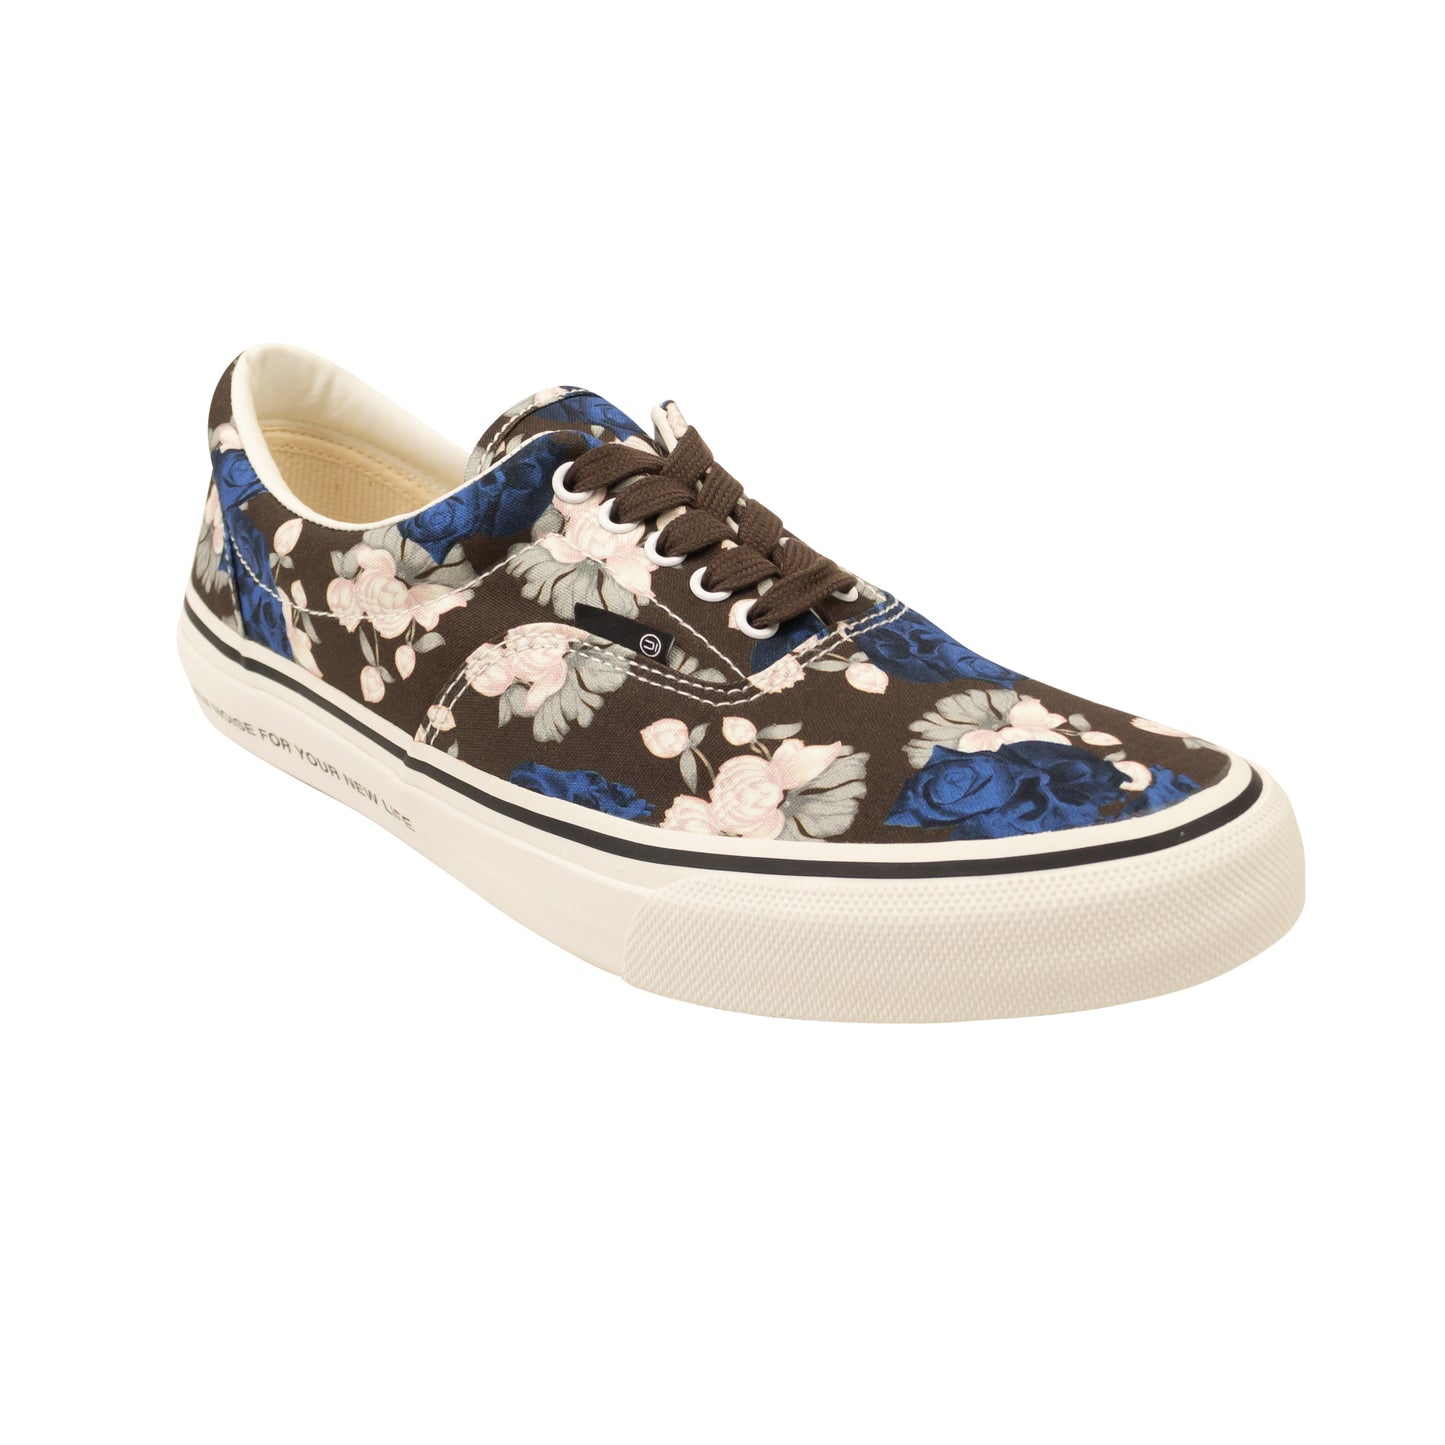 Undercover Floral Print Sneakers - Brown